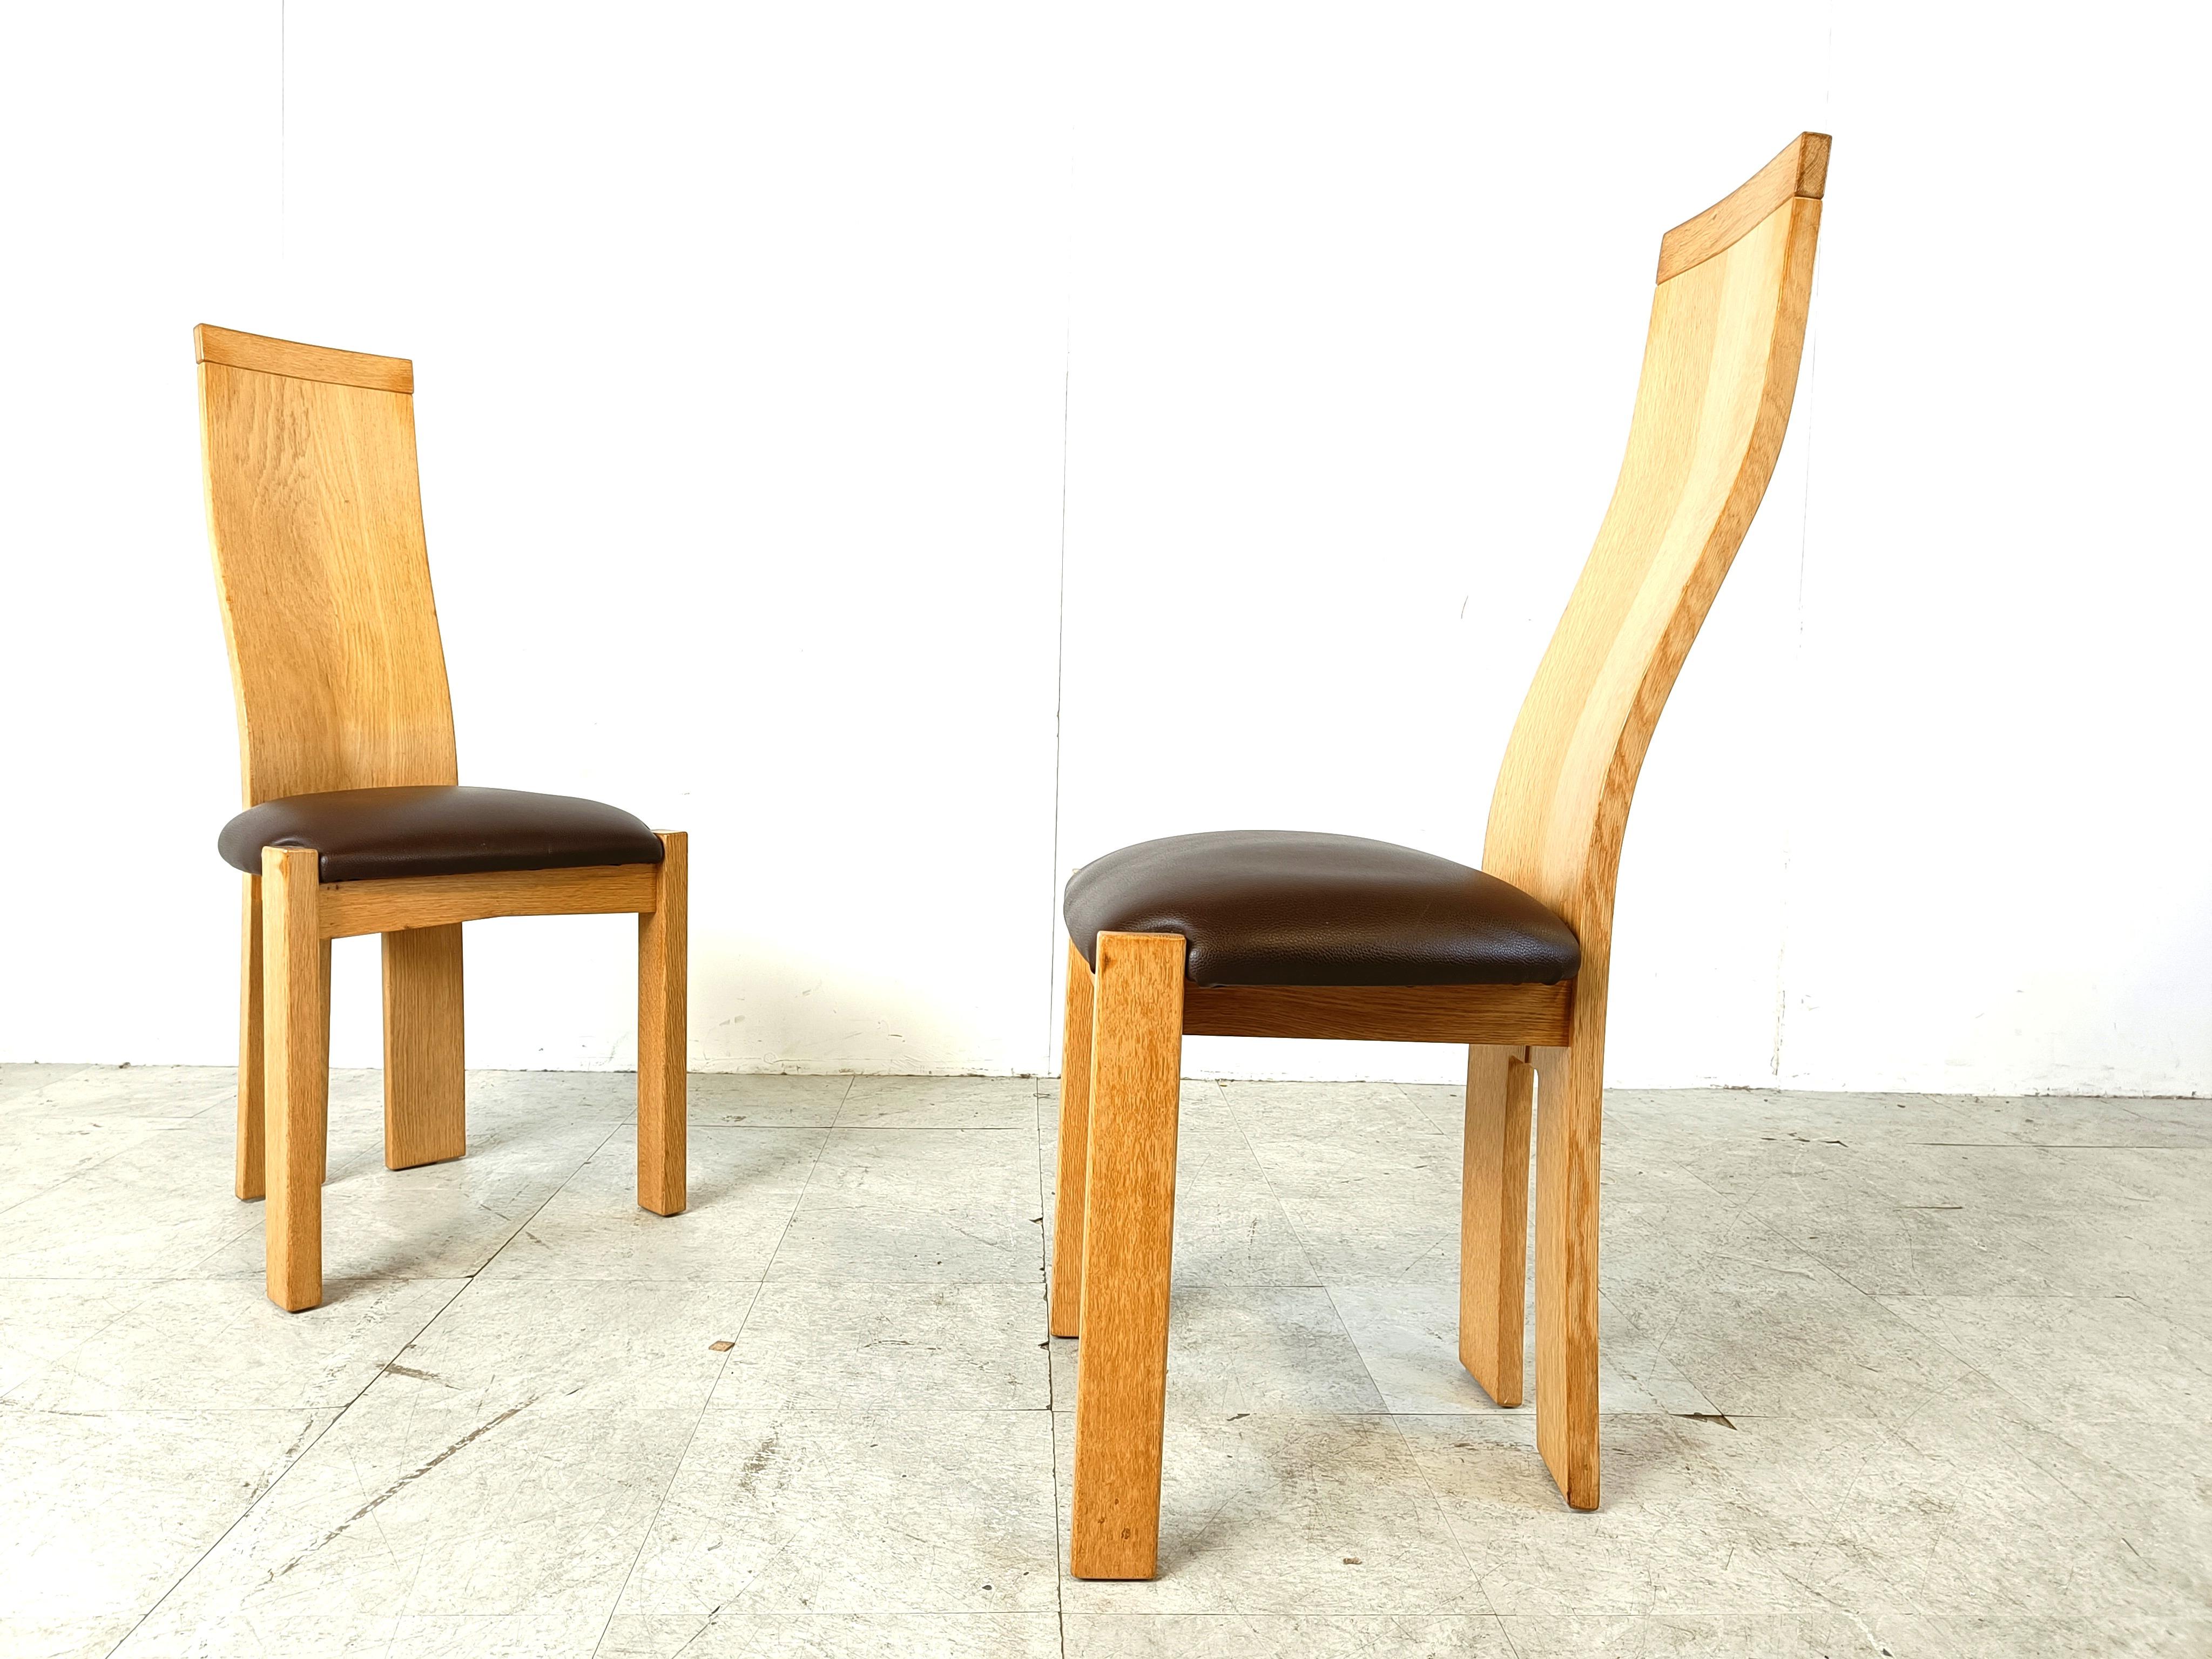 Set of 8 dining chairs by Rob & Dries van den Berghe, 1980s For Sale 2